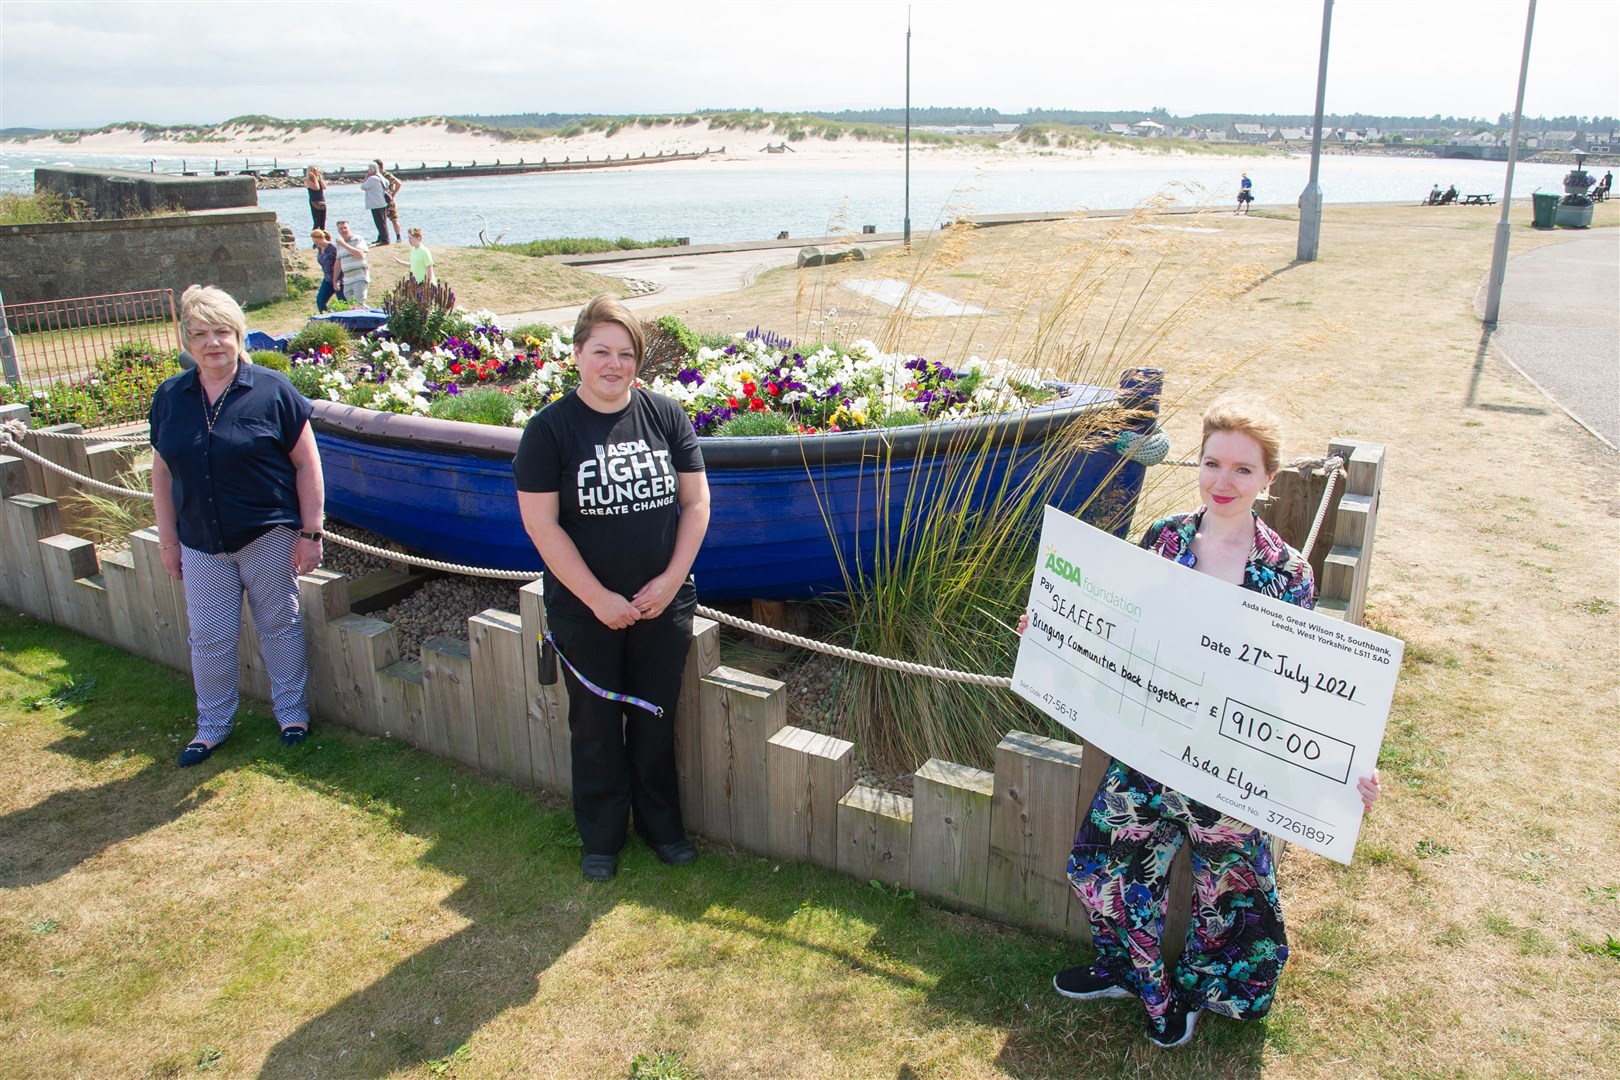 Asda Foundation donates £910 to the Lossiemouth Seafest...Left to right: Donna Milne, Asda Community Champion Kaye Macleod and Helen O'Neill...Picture: Daniel Forsyth..